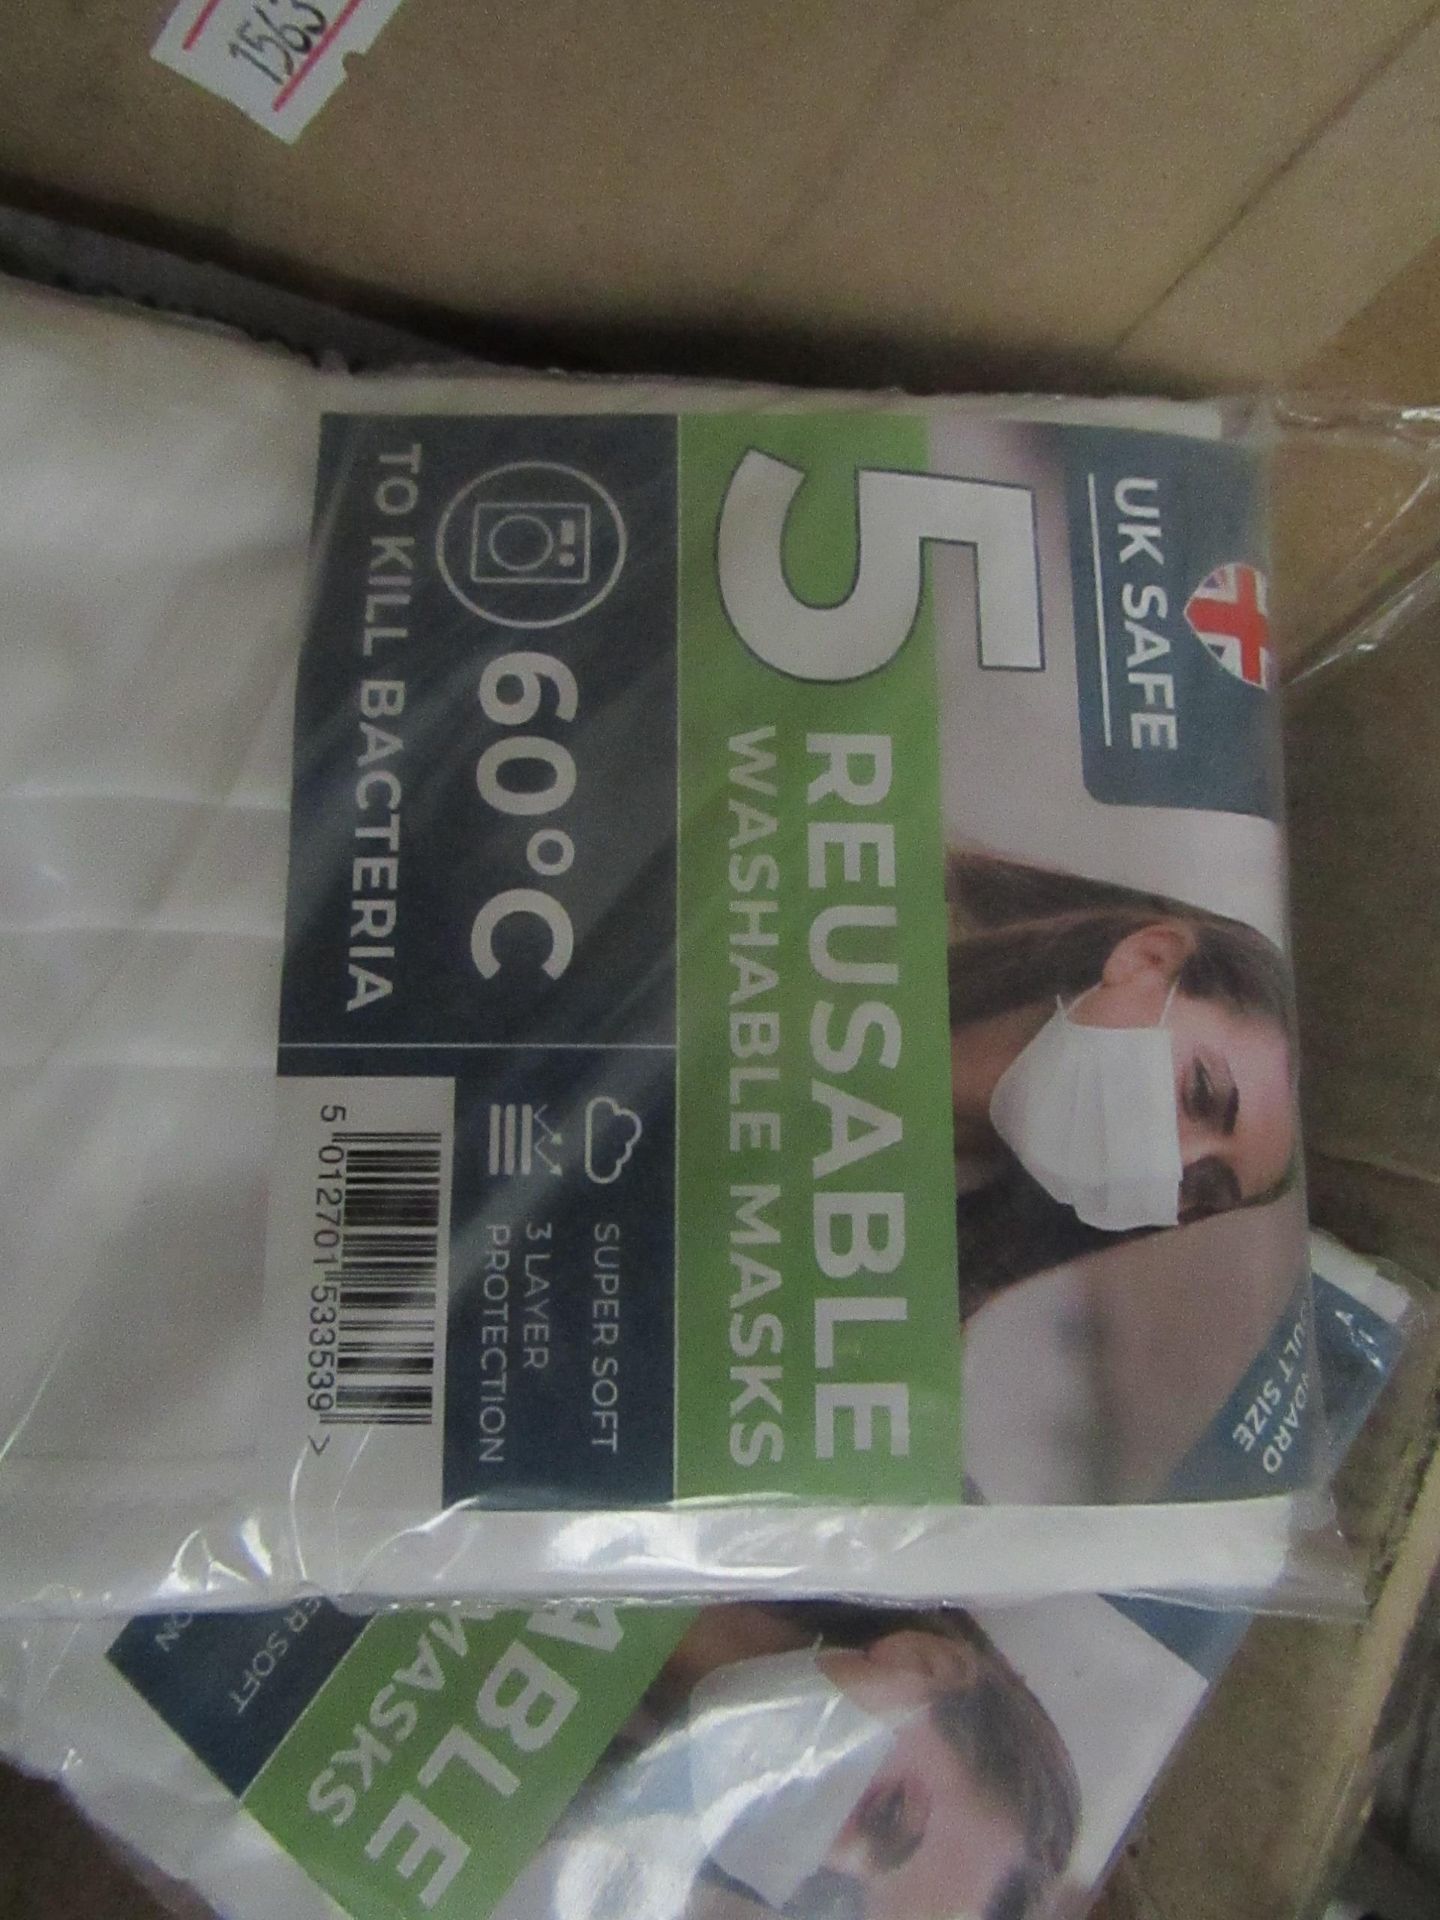 1x Box Containing 50x disposable face masks - New & Packaged.